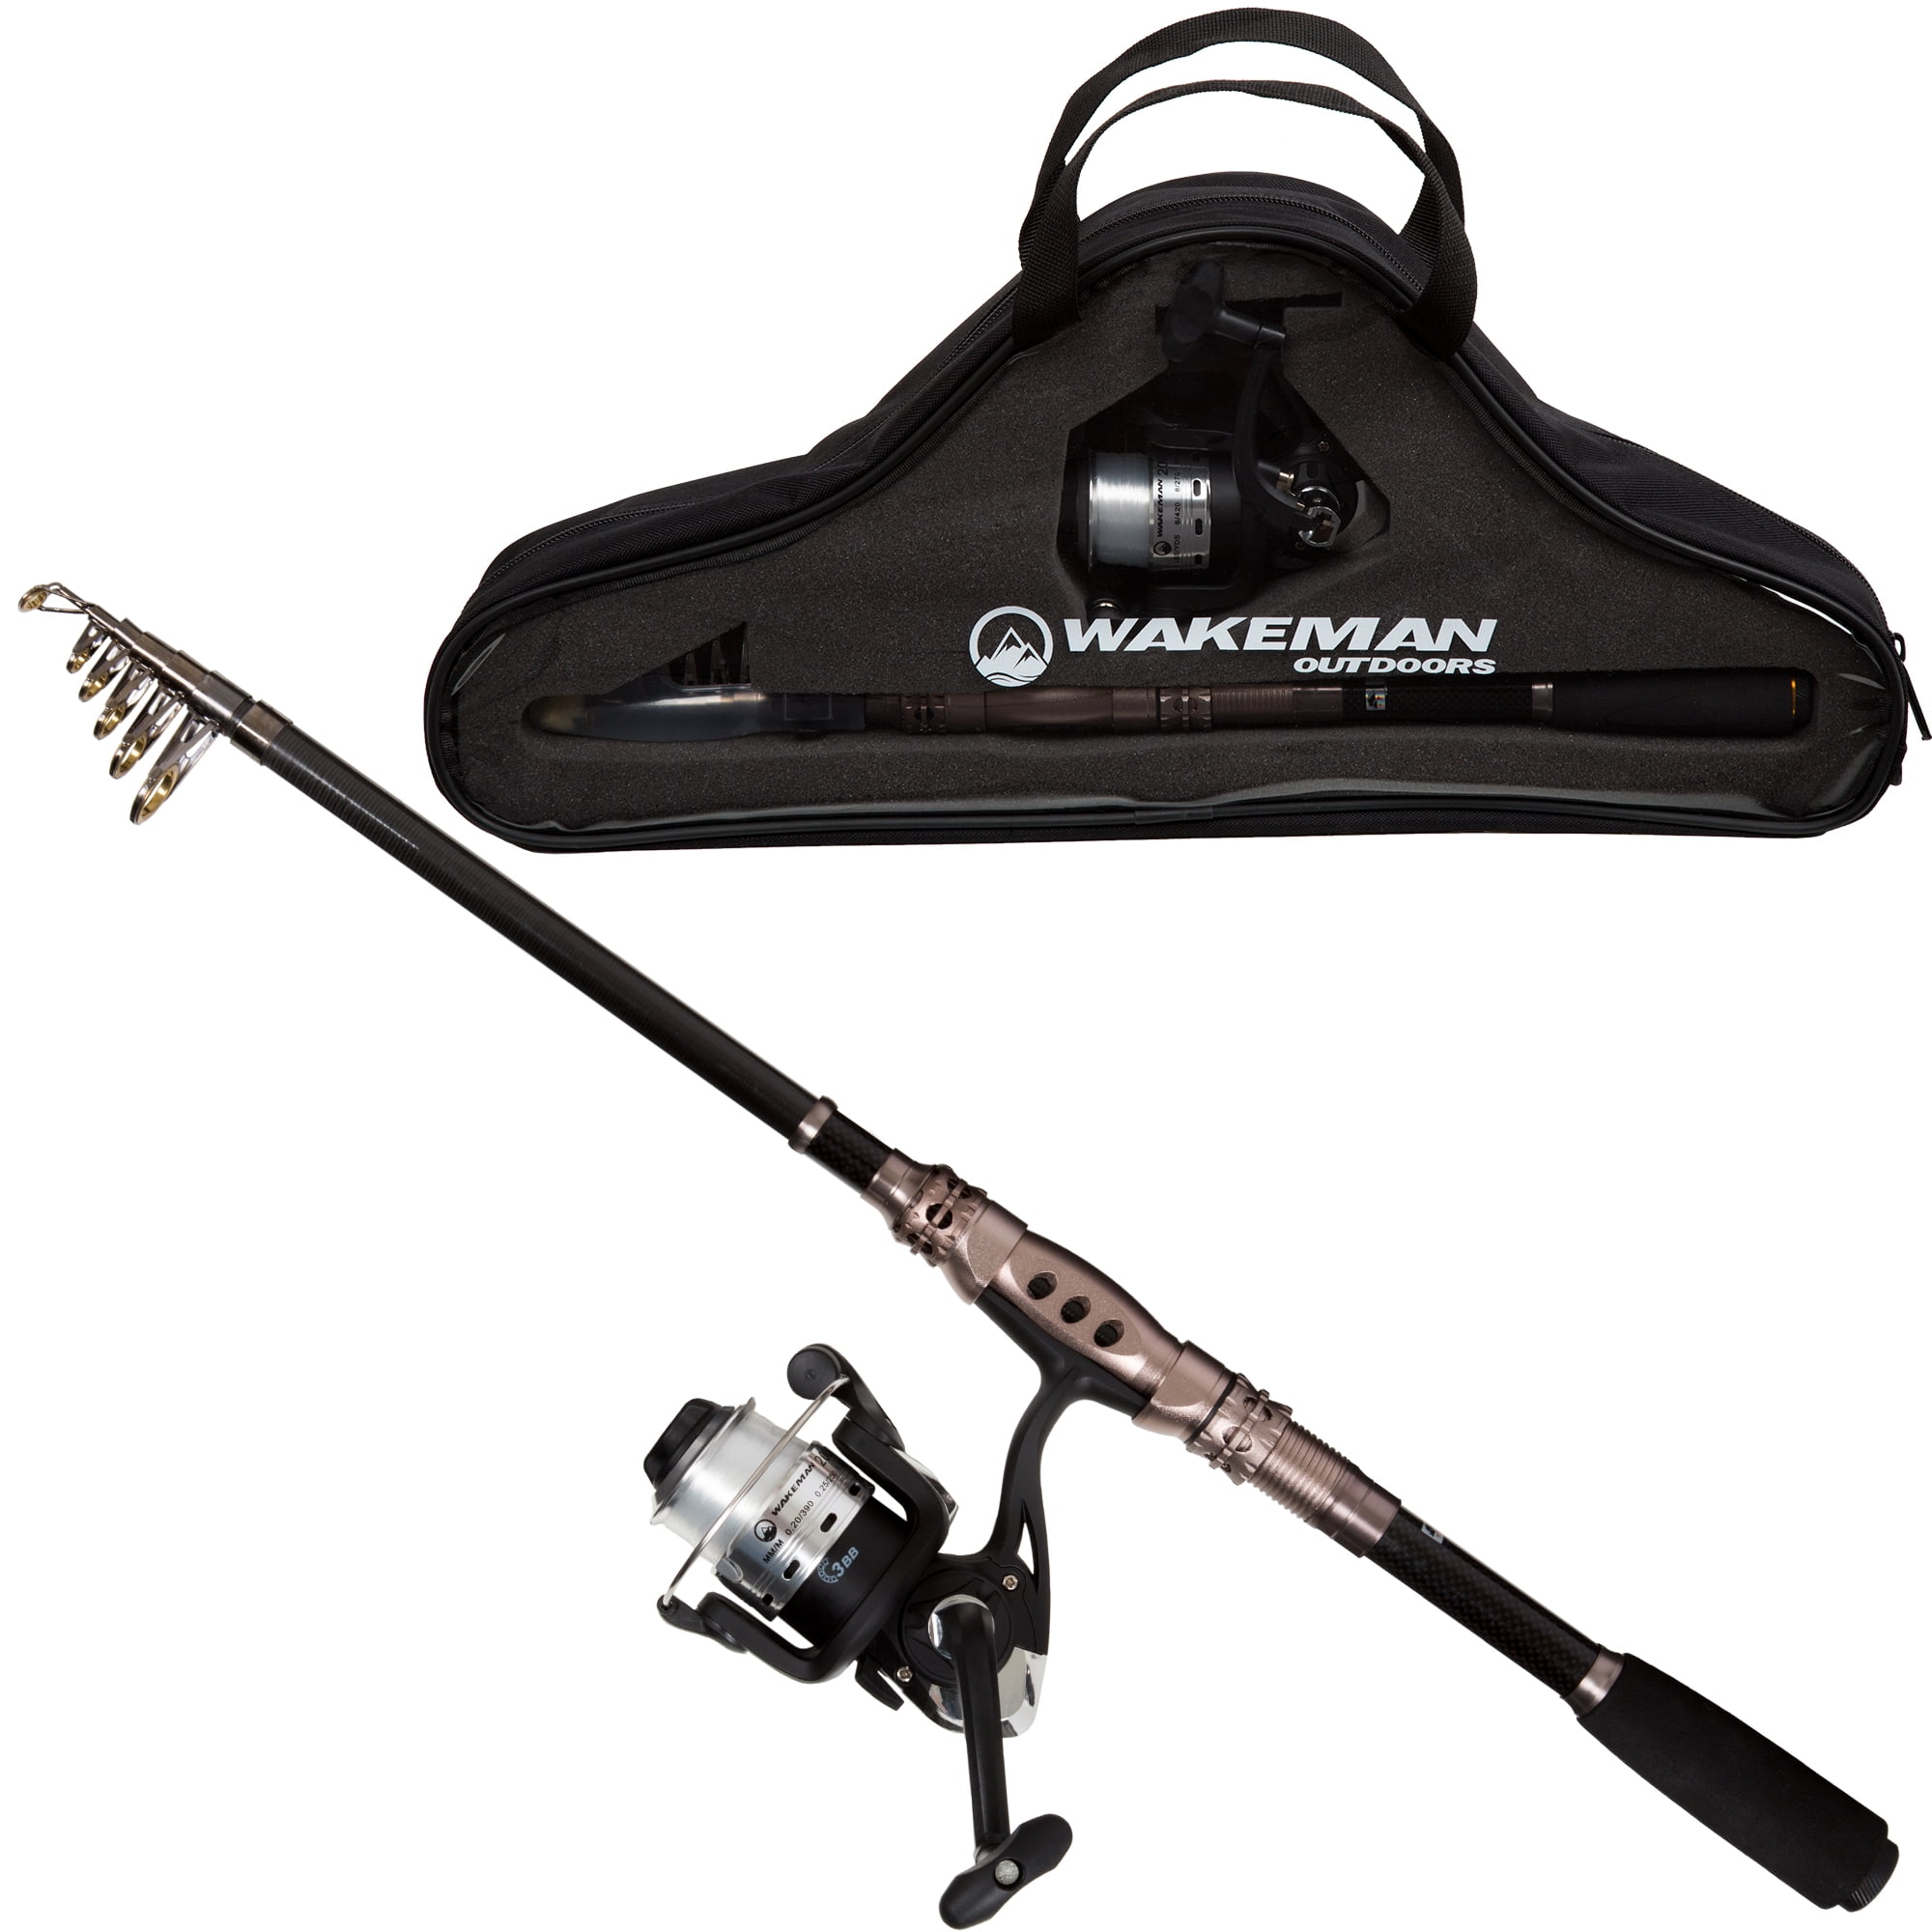 Wakeman 5'6 Telescopic Spinning Rod and Reel Combo With Carry Case 